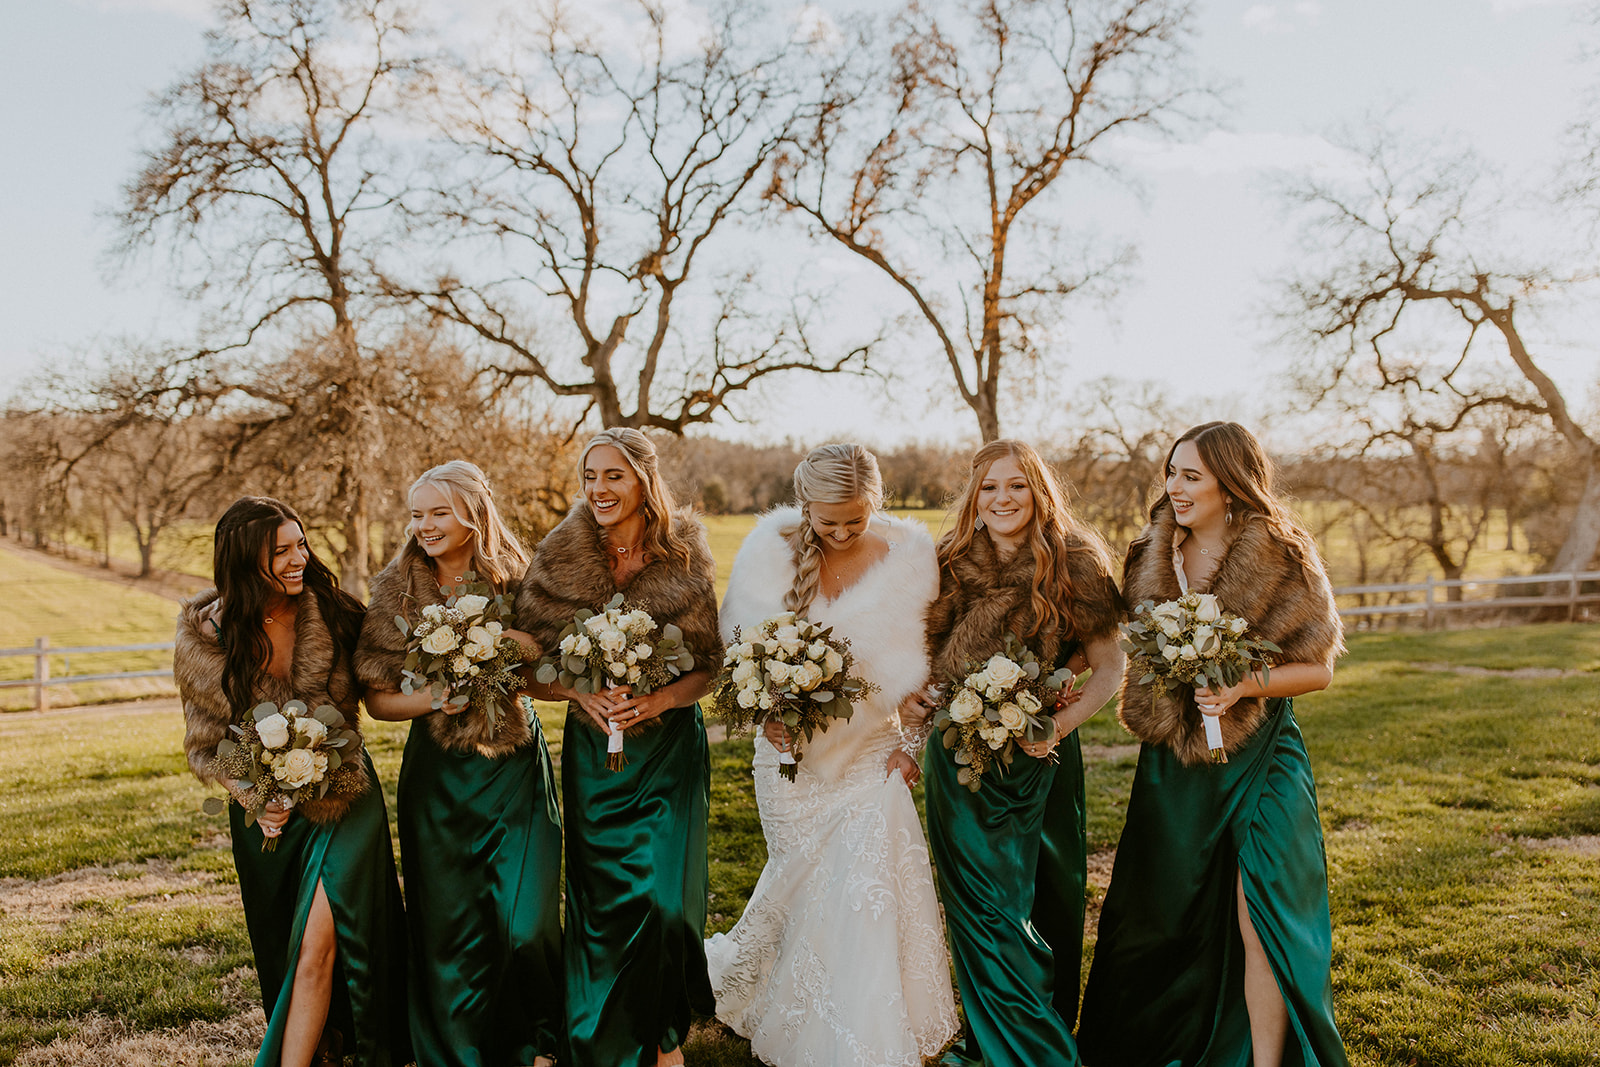 bridesmaids wear satin forest green bridesmaid dresses for this winter wedding. the bride and her bridesmaids walk towards the camera and laugh together. photo by codi baer photography